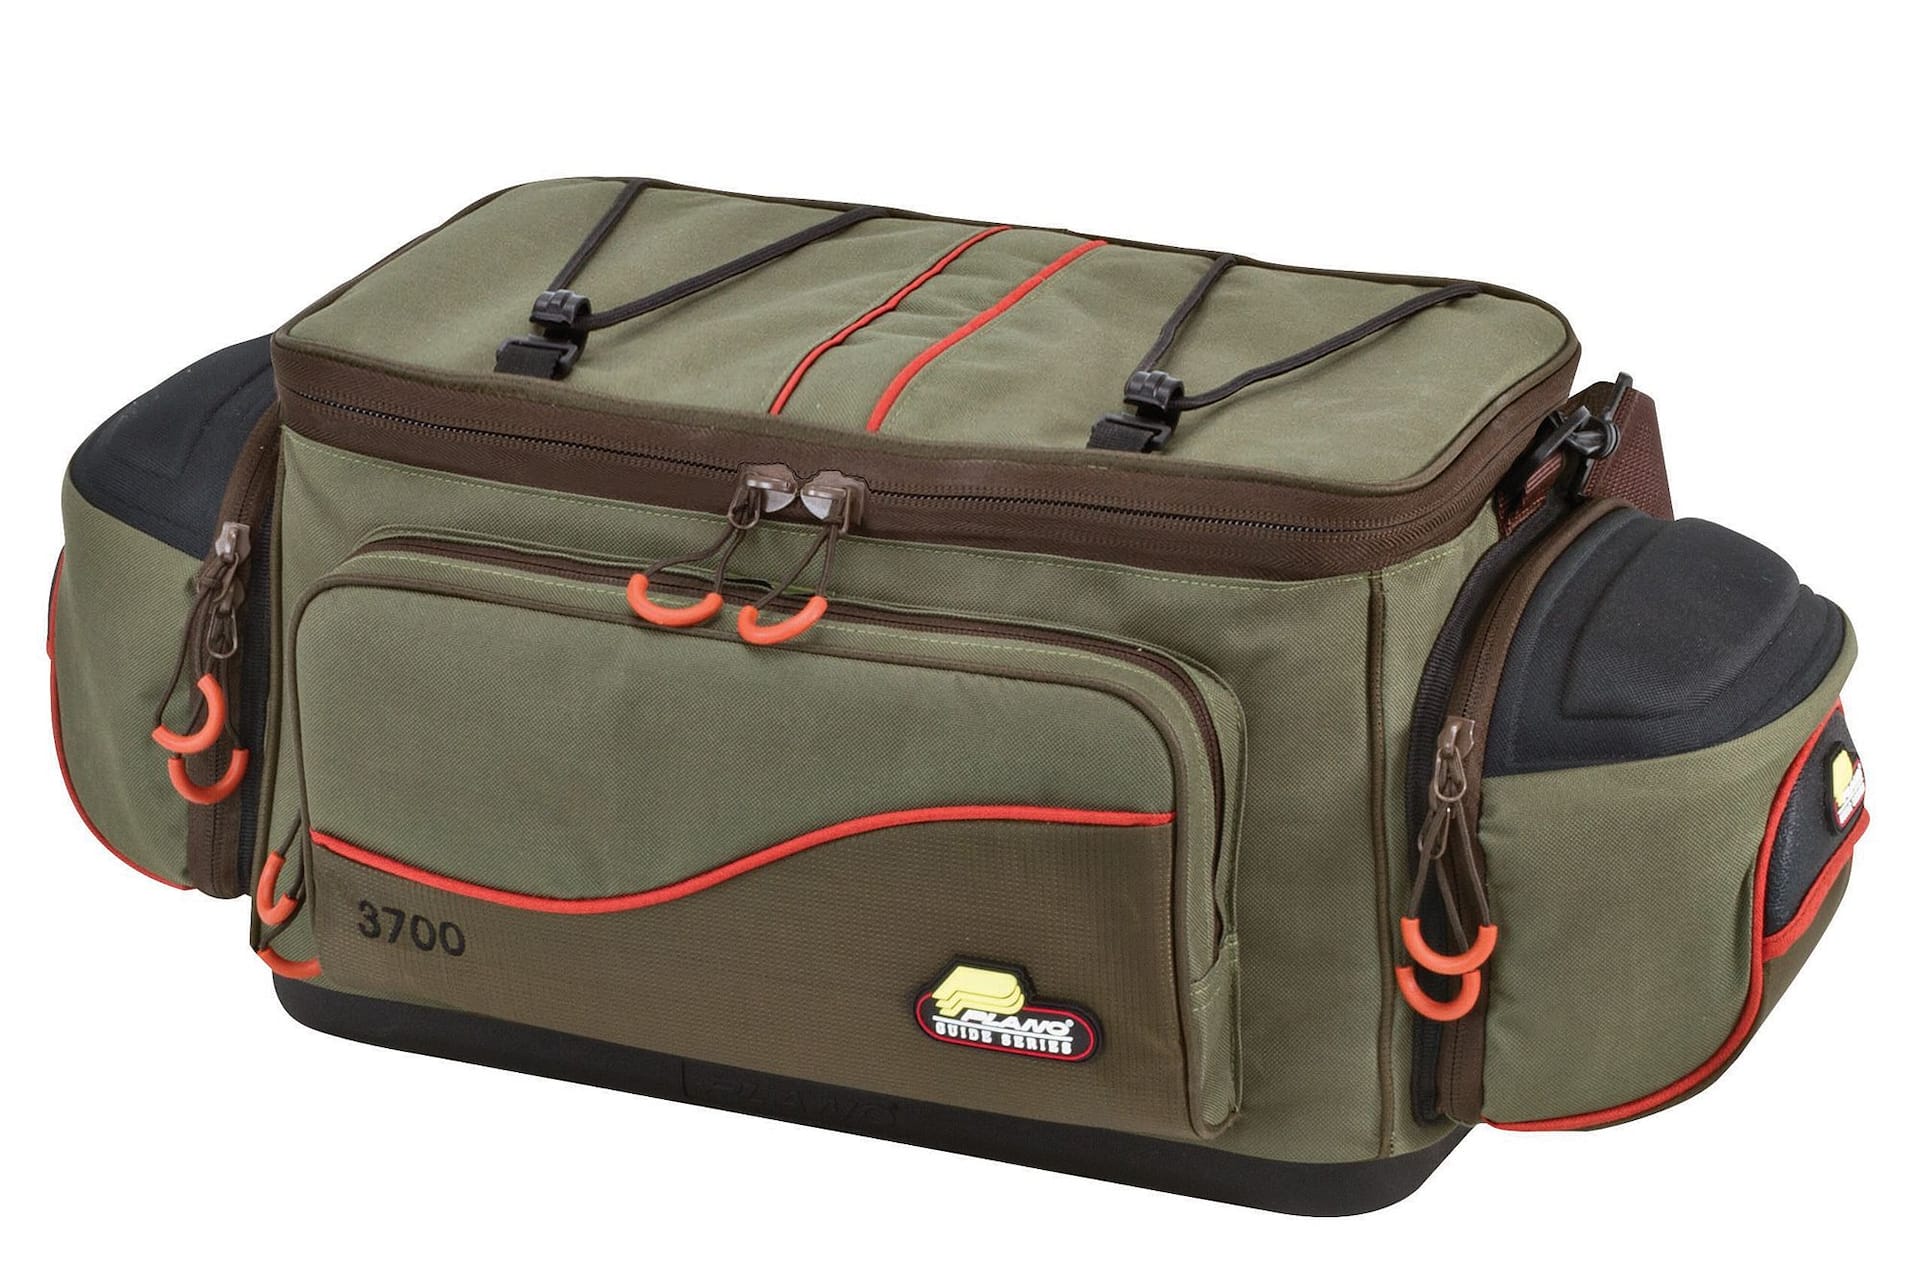 Plano Guide Series Bag with Four 3650 Stowaways (Brown/Grey, Medium)